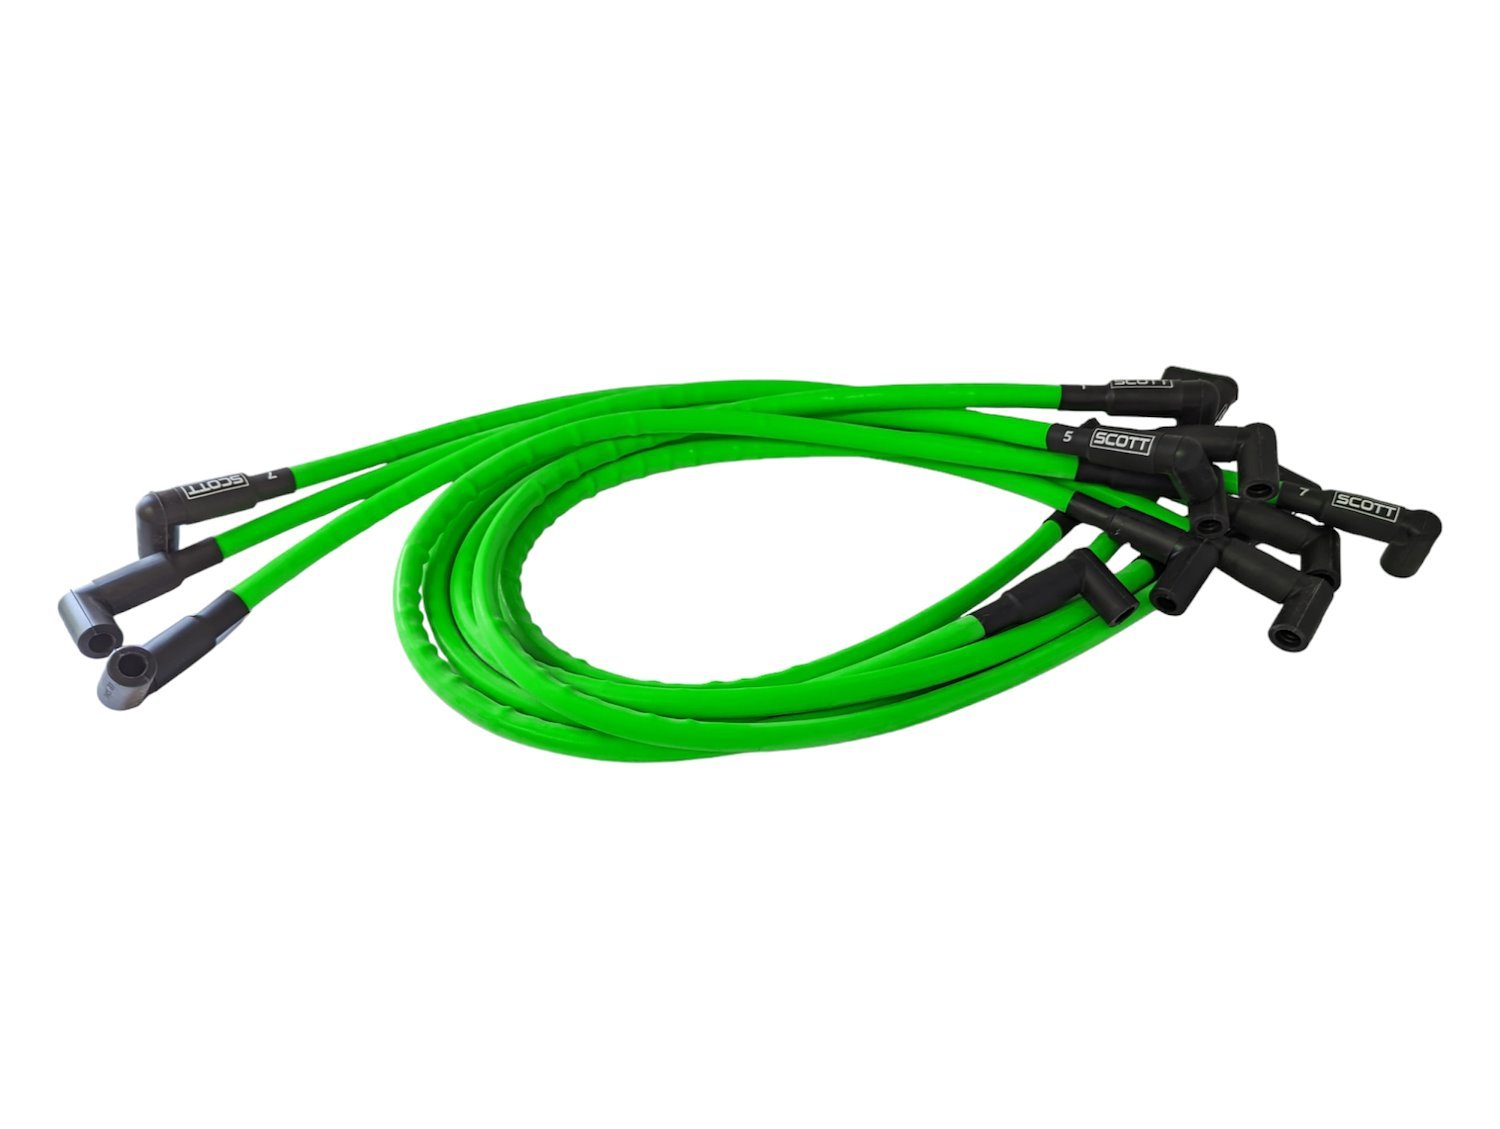 SPW300-CH-416-8 Super Mag Fiberglass-Oversleeved Spark Plug Wire Set for Big Block Chevy, Under Header [Green]